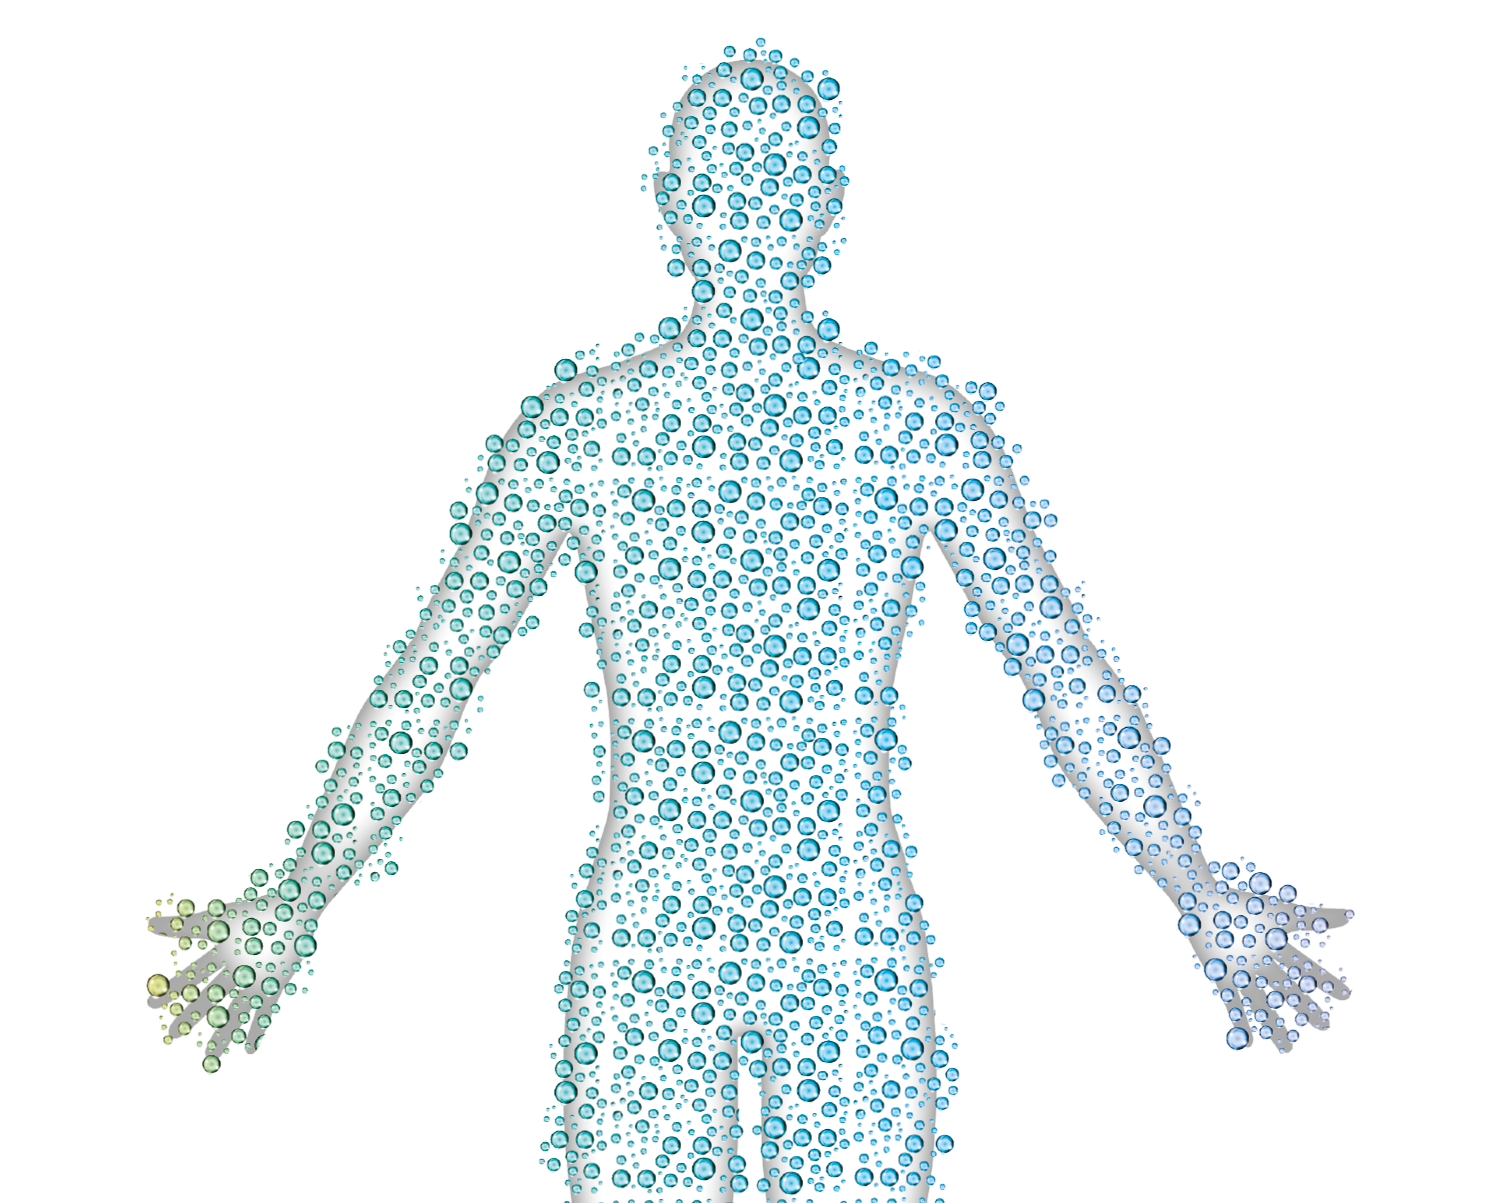 Body outline covered in oxygen bubbles